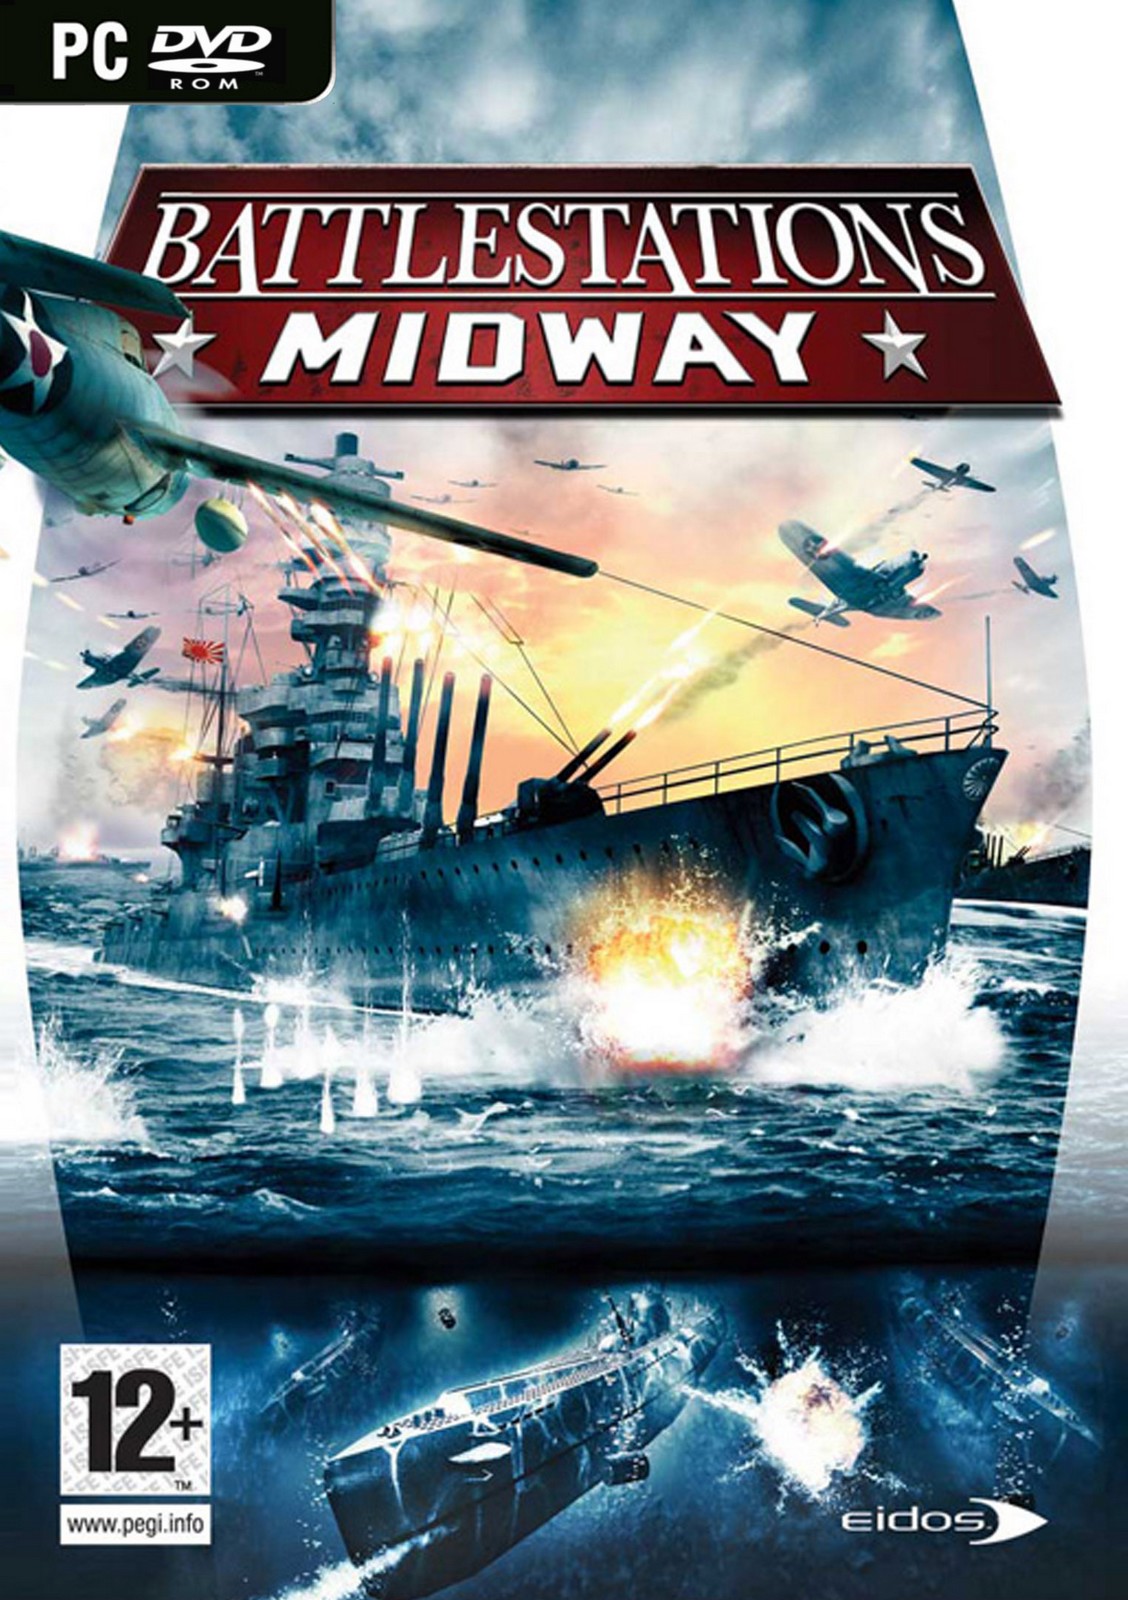 battlestations-midway-strategywiki-strategy-guide-and-game-reference-wiki